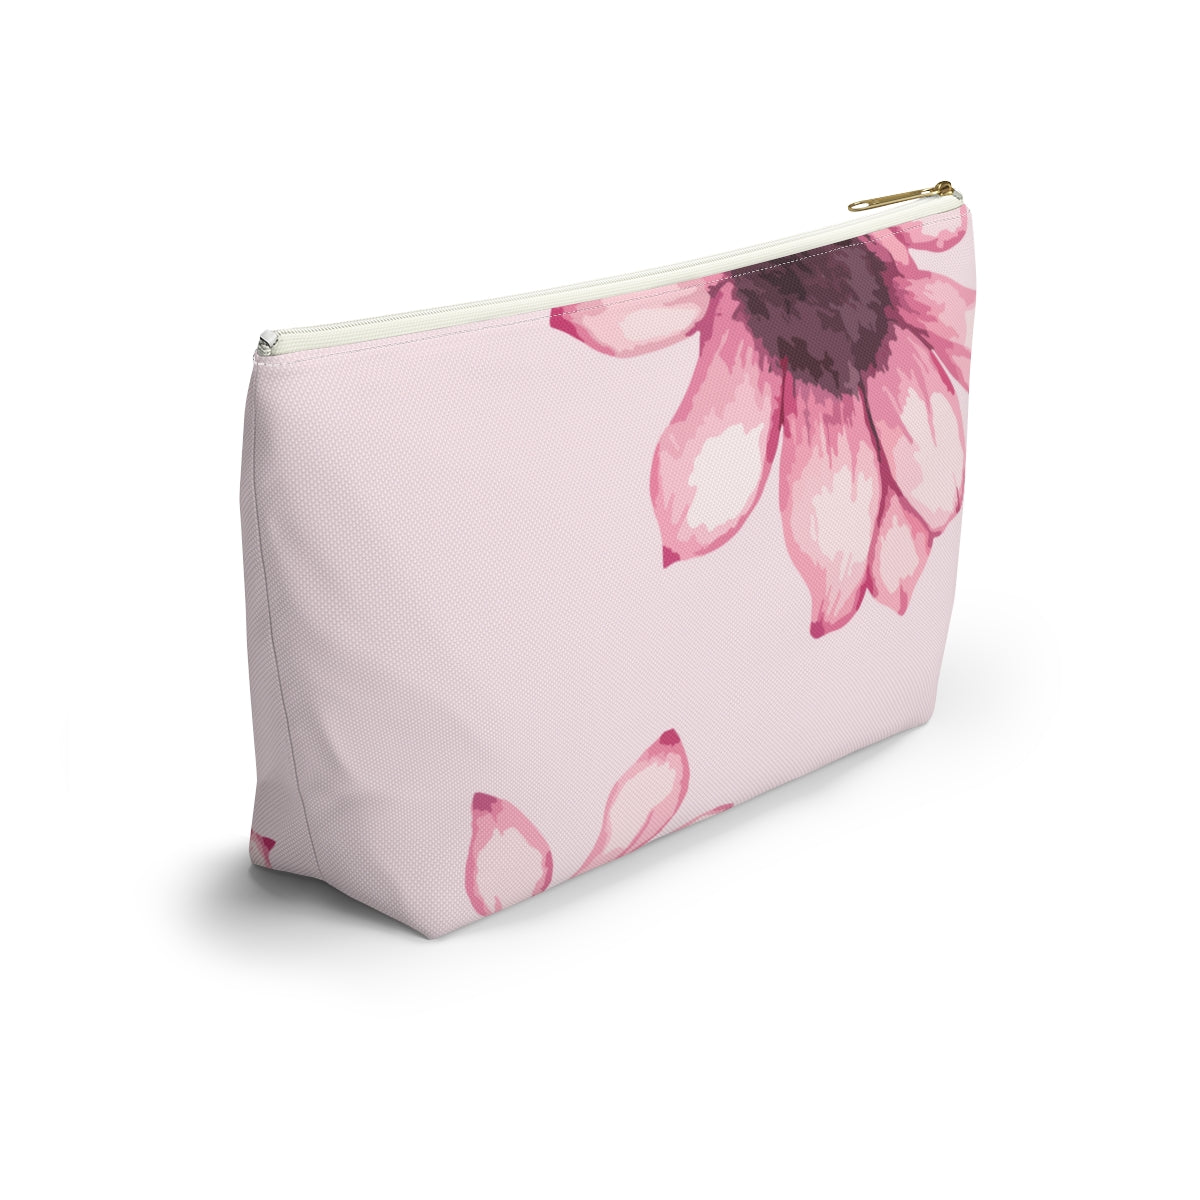 Cosmetic Bag Accessory Pouch Travel Toiletry Bag Designer Pink Floral Makeup Bag for Women and Girls